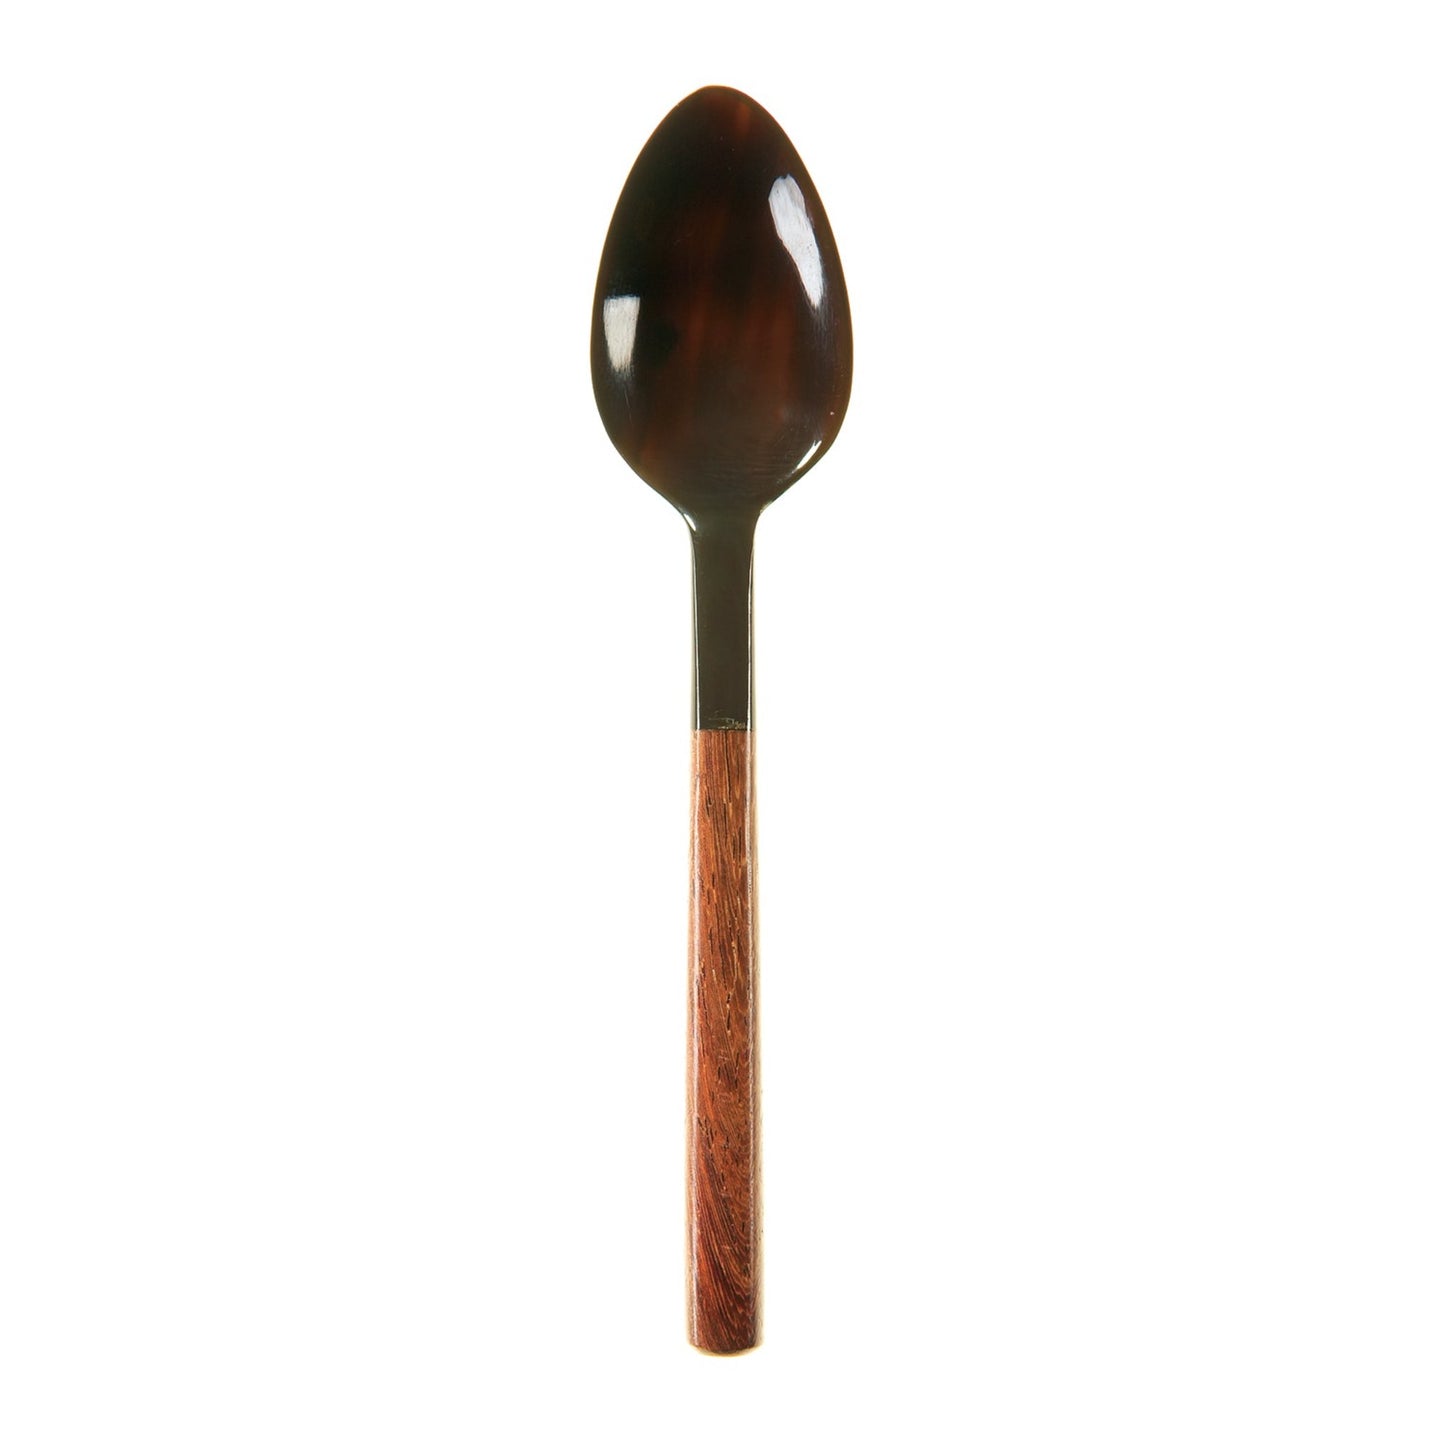 A black water buffalo horn egg spoon with a rosewood handle